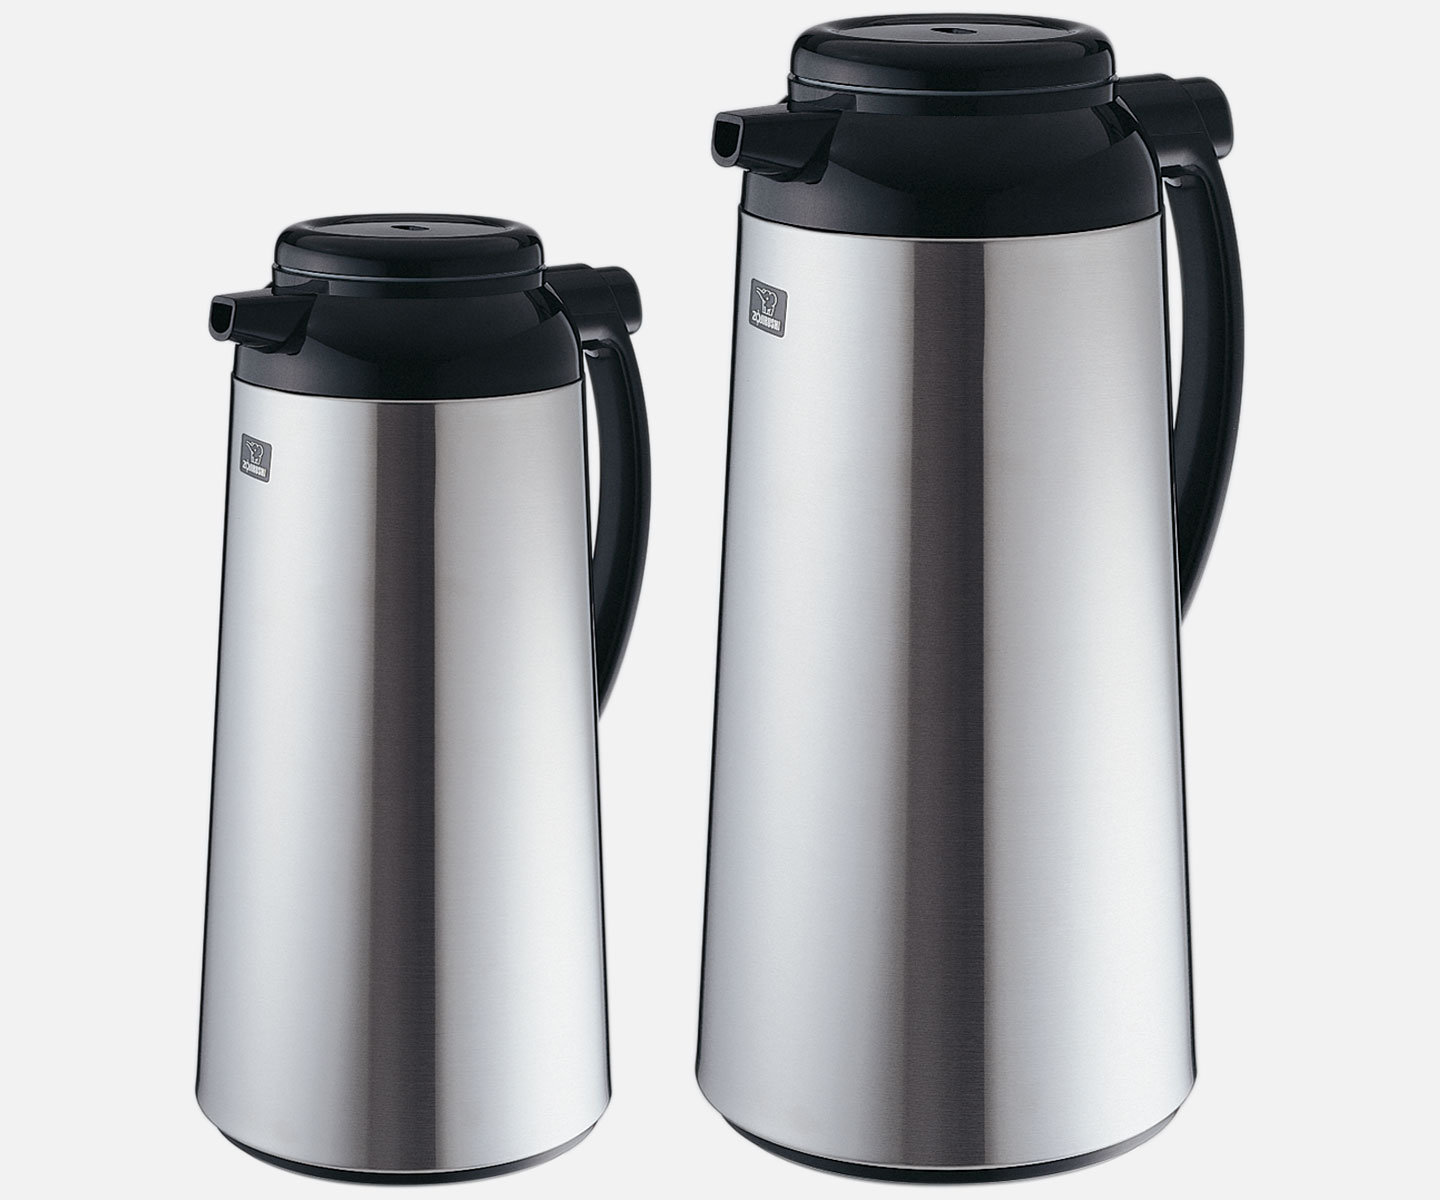 Two stainless steel carafes with black lids, one smaller on the left and a larger one on the right.